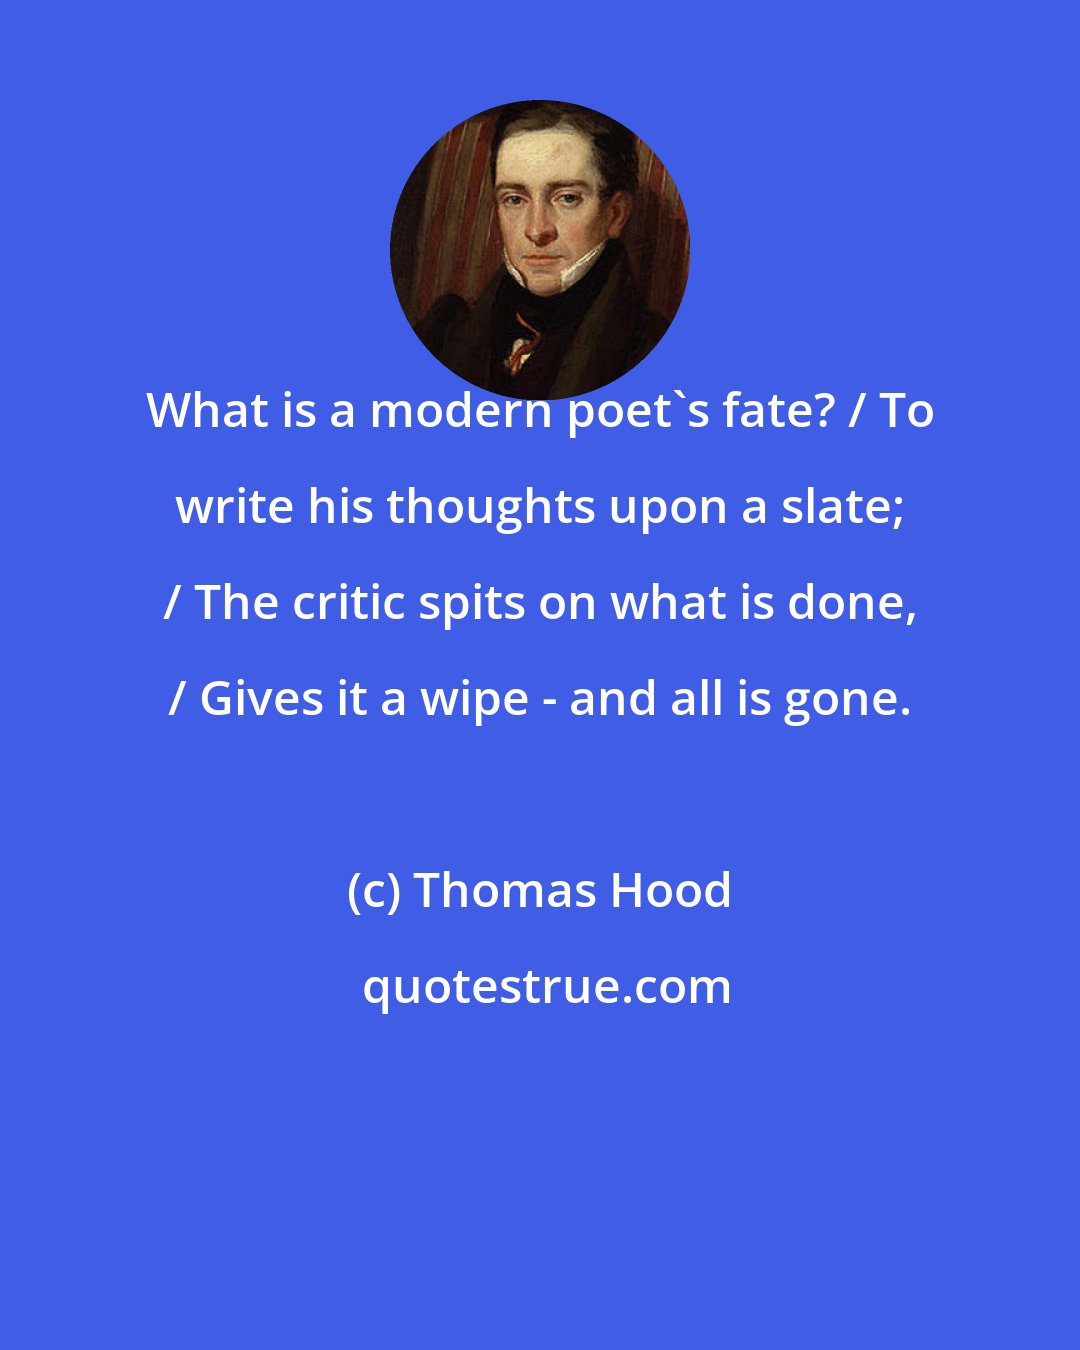 Thomas Hood: What is a modern poet's fate? / To write his thoughts upon a slate; / The critic spits on what is done, / Gives it a wipe - and all is gone.